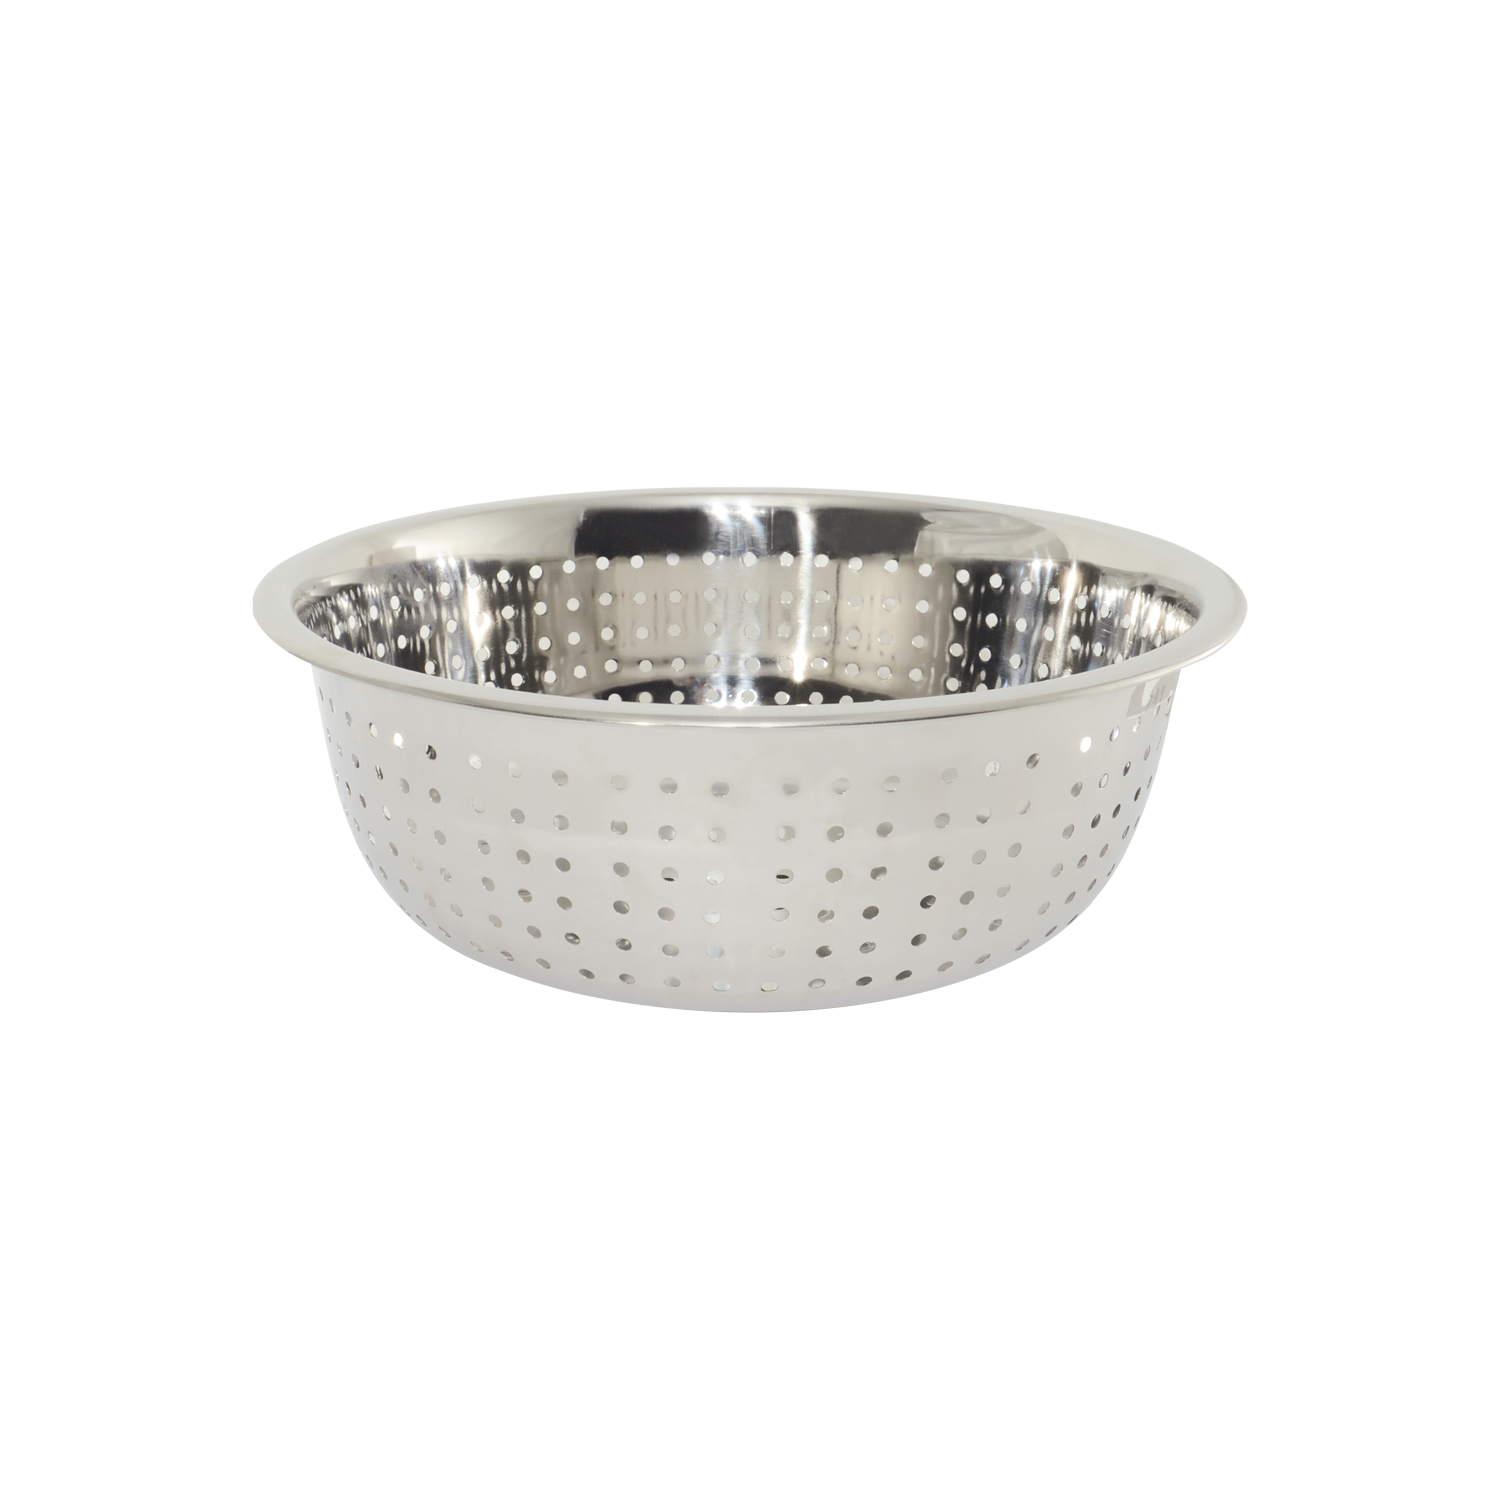 CAC China SCD5-L14 Stainless Steel Chinese Colander, Large Hole 13.75 Qt. 